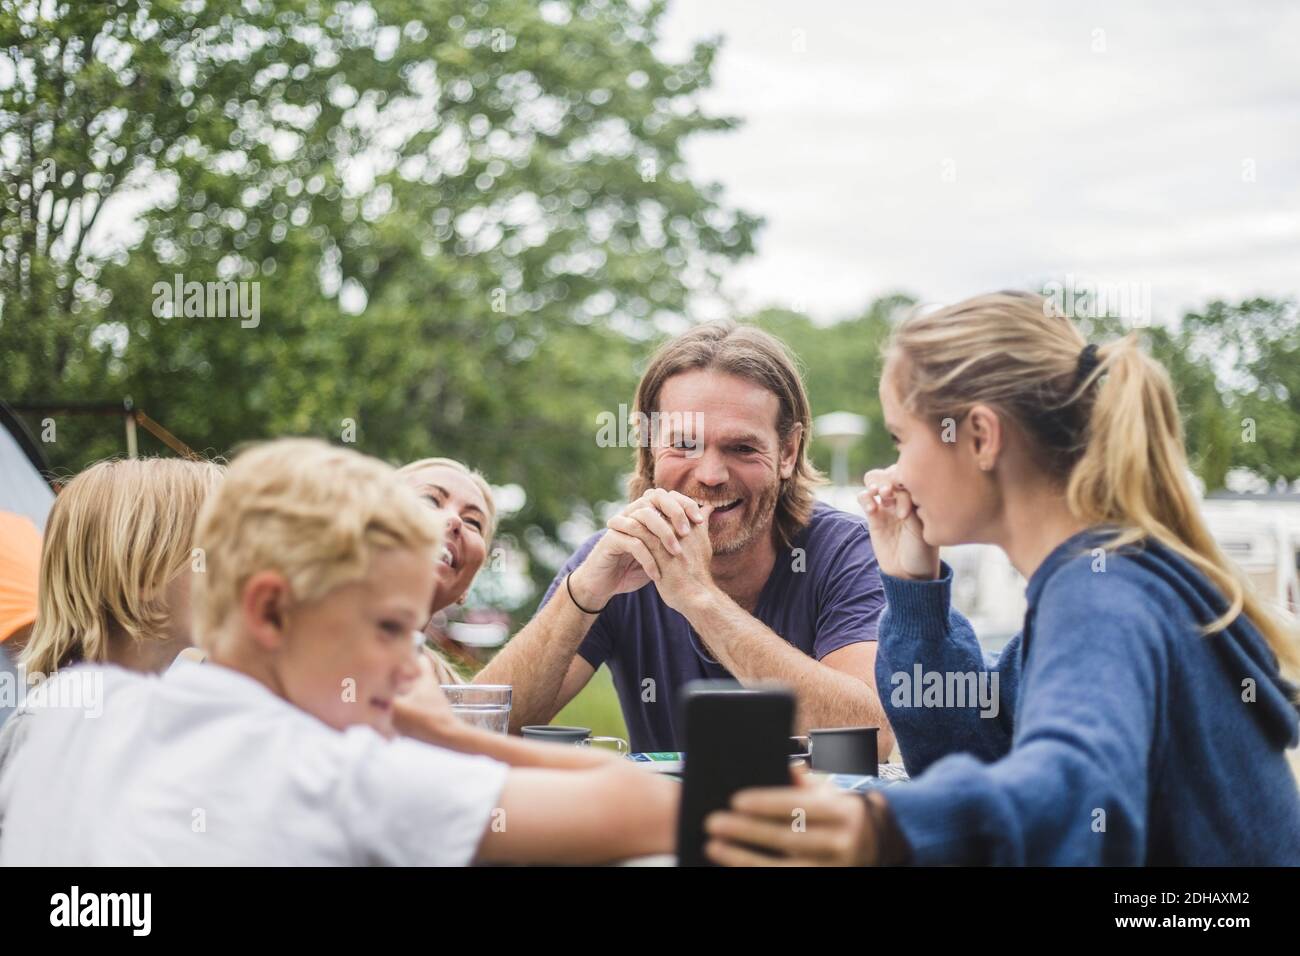 Teenage girl taking selfie with family on table at camping site Stock Photo